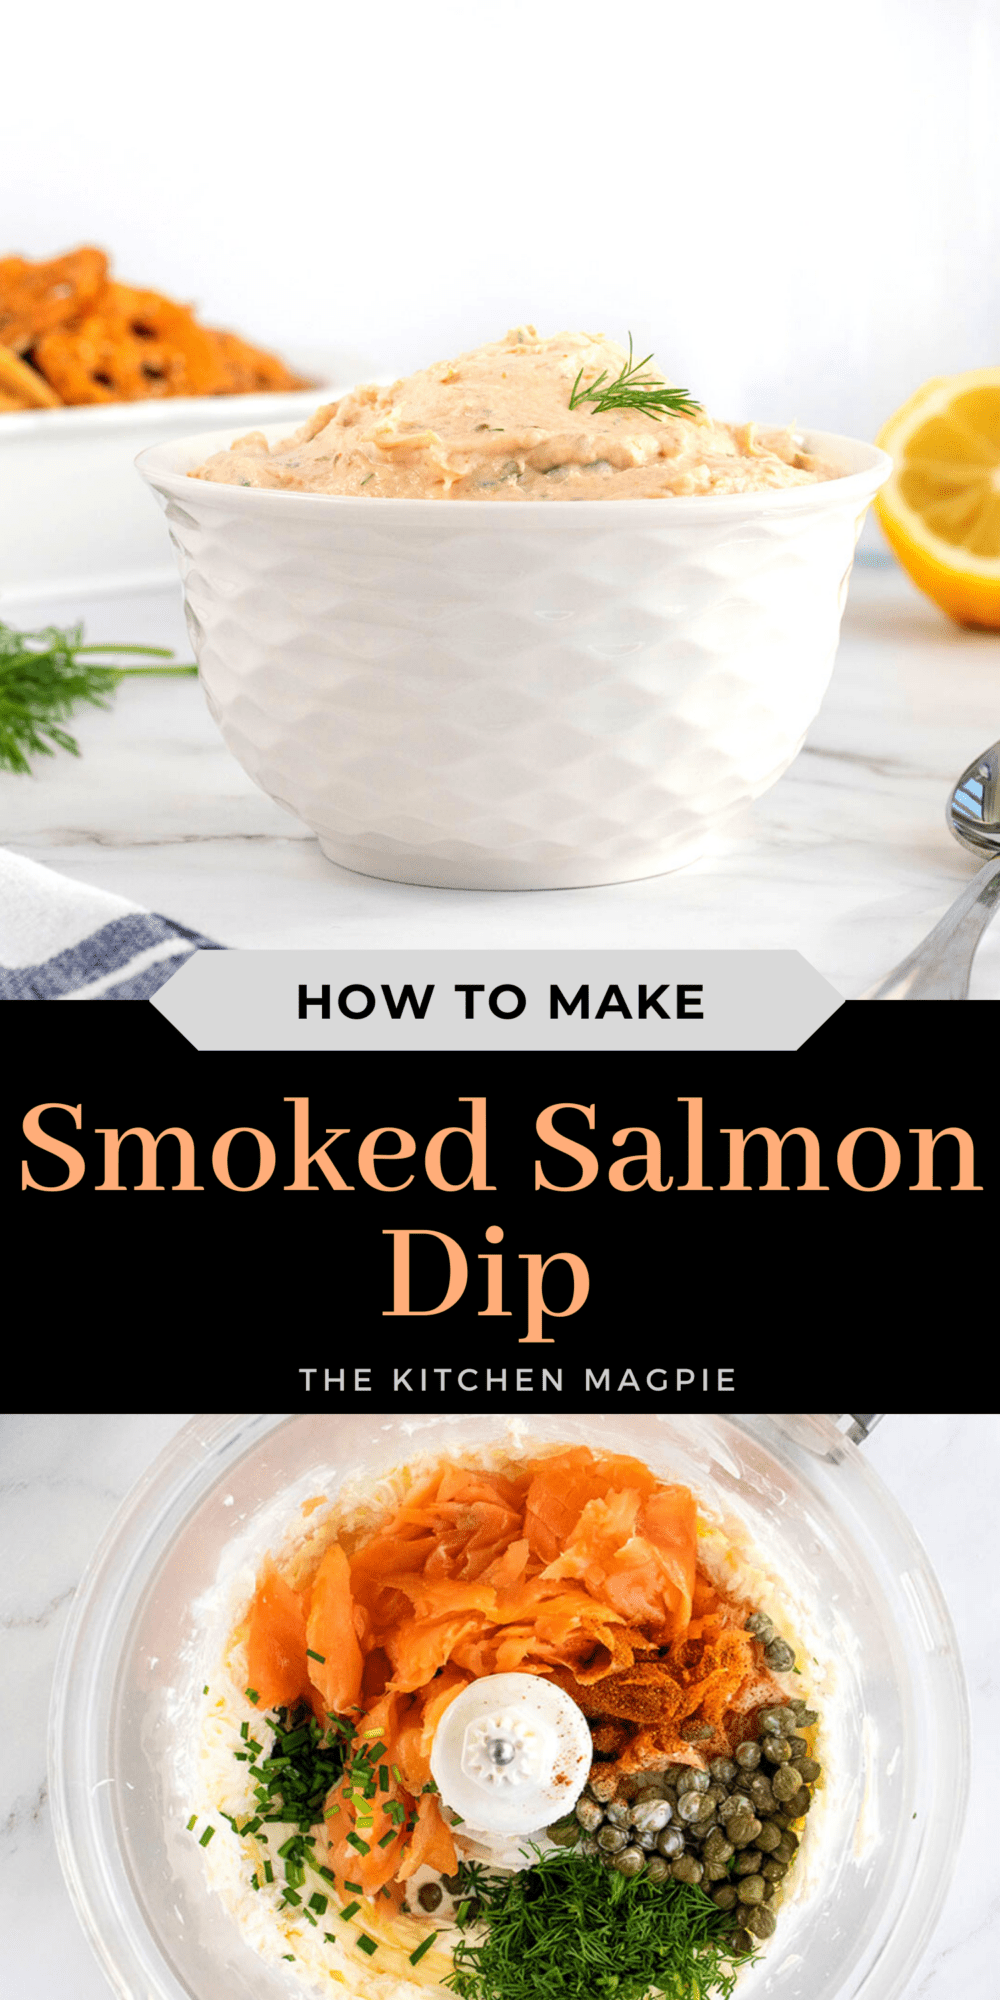 How to make a creamy, flavor-packed smoked salmon dip that is amazing for parties and gatherings with crackers and bread cubes, or simply slathered on a bagel for your own meal!